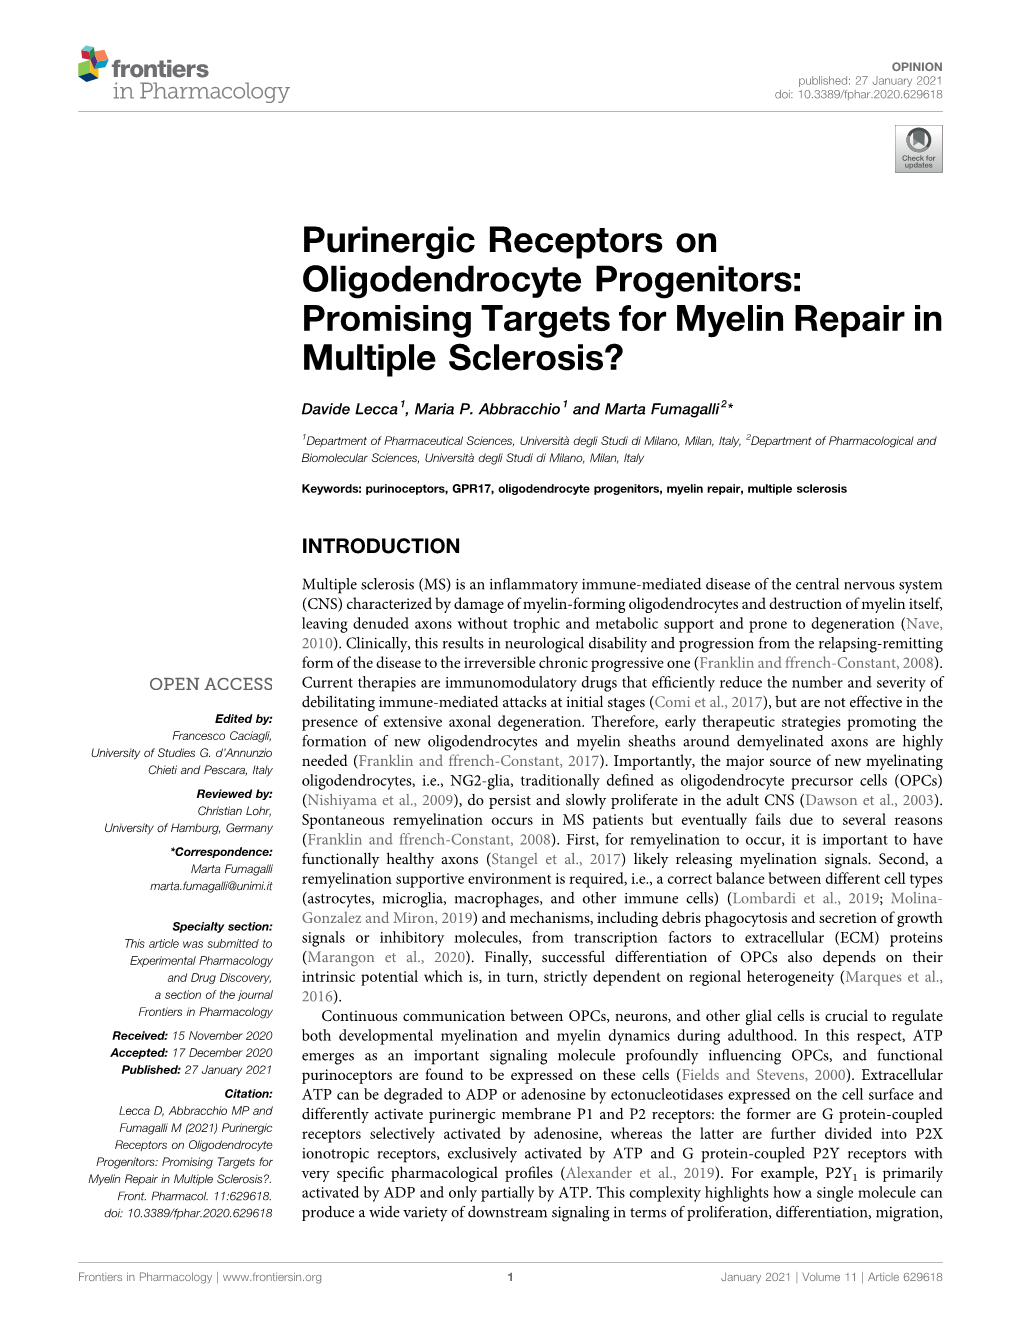 Purinergic Receptors on Oligodendrocyte Progenitors: Promising Targets for Myelin Repair in Multiple Sclerosis?